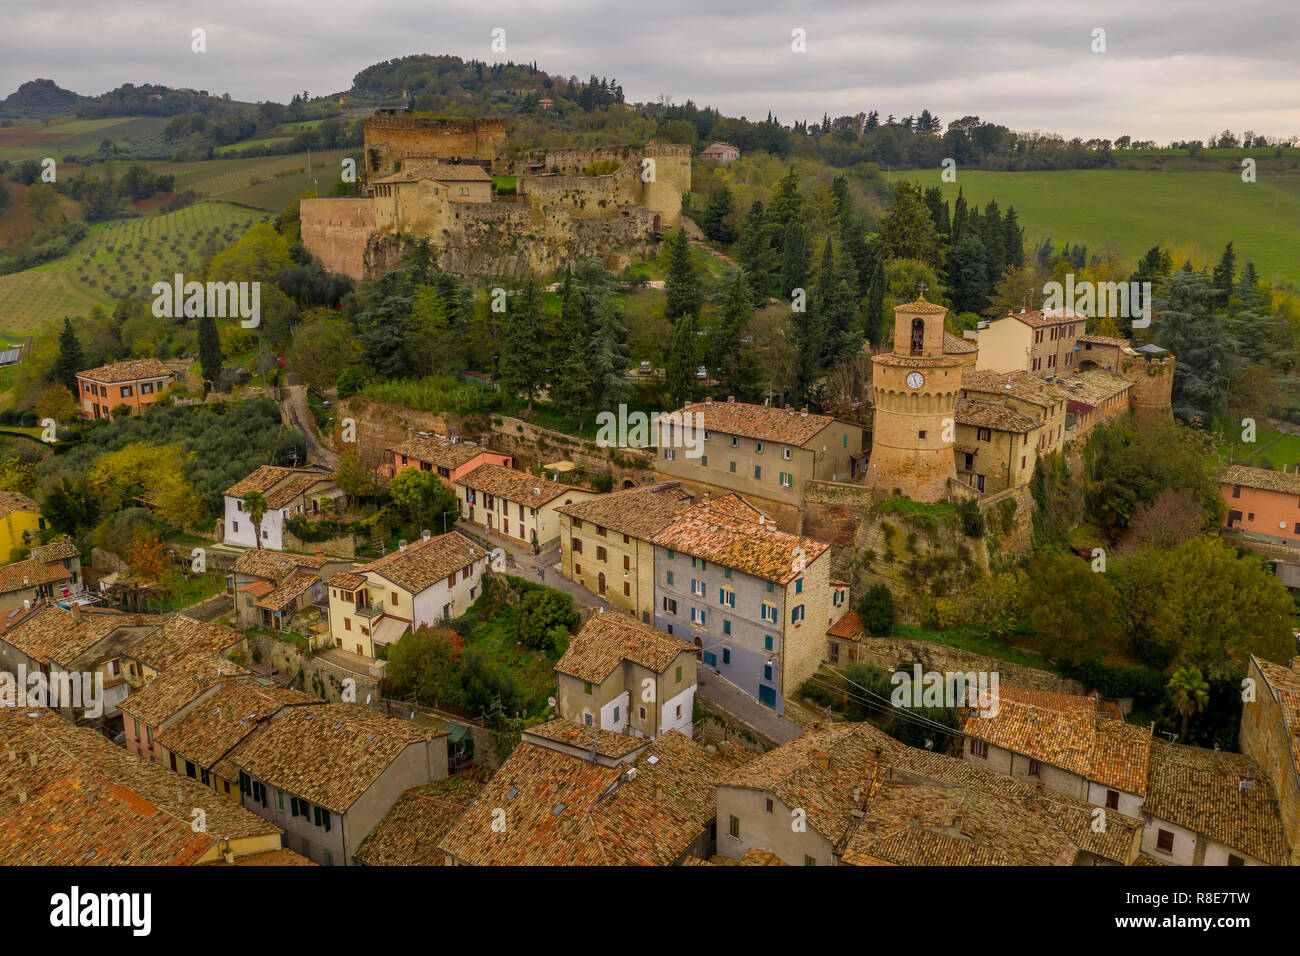 Aerial view of thermal spa town, Gothic medival castle fortezza and colorful houses in Castrocaro Terme, Cesena Forli province, Emilia Romagna, Italy Stock Photo